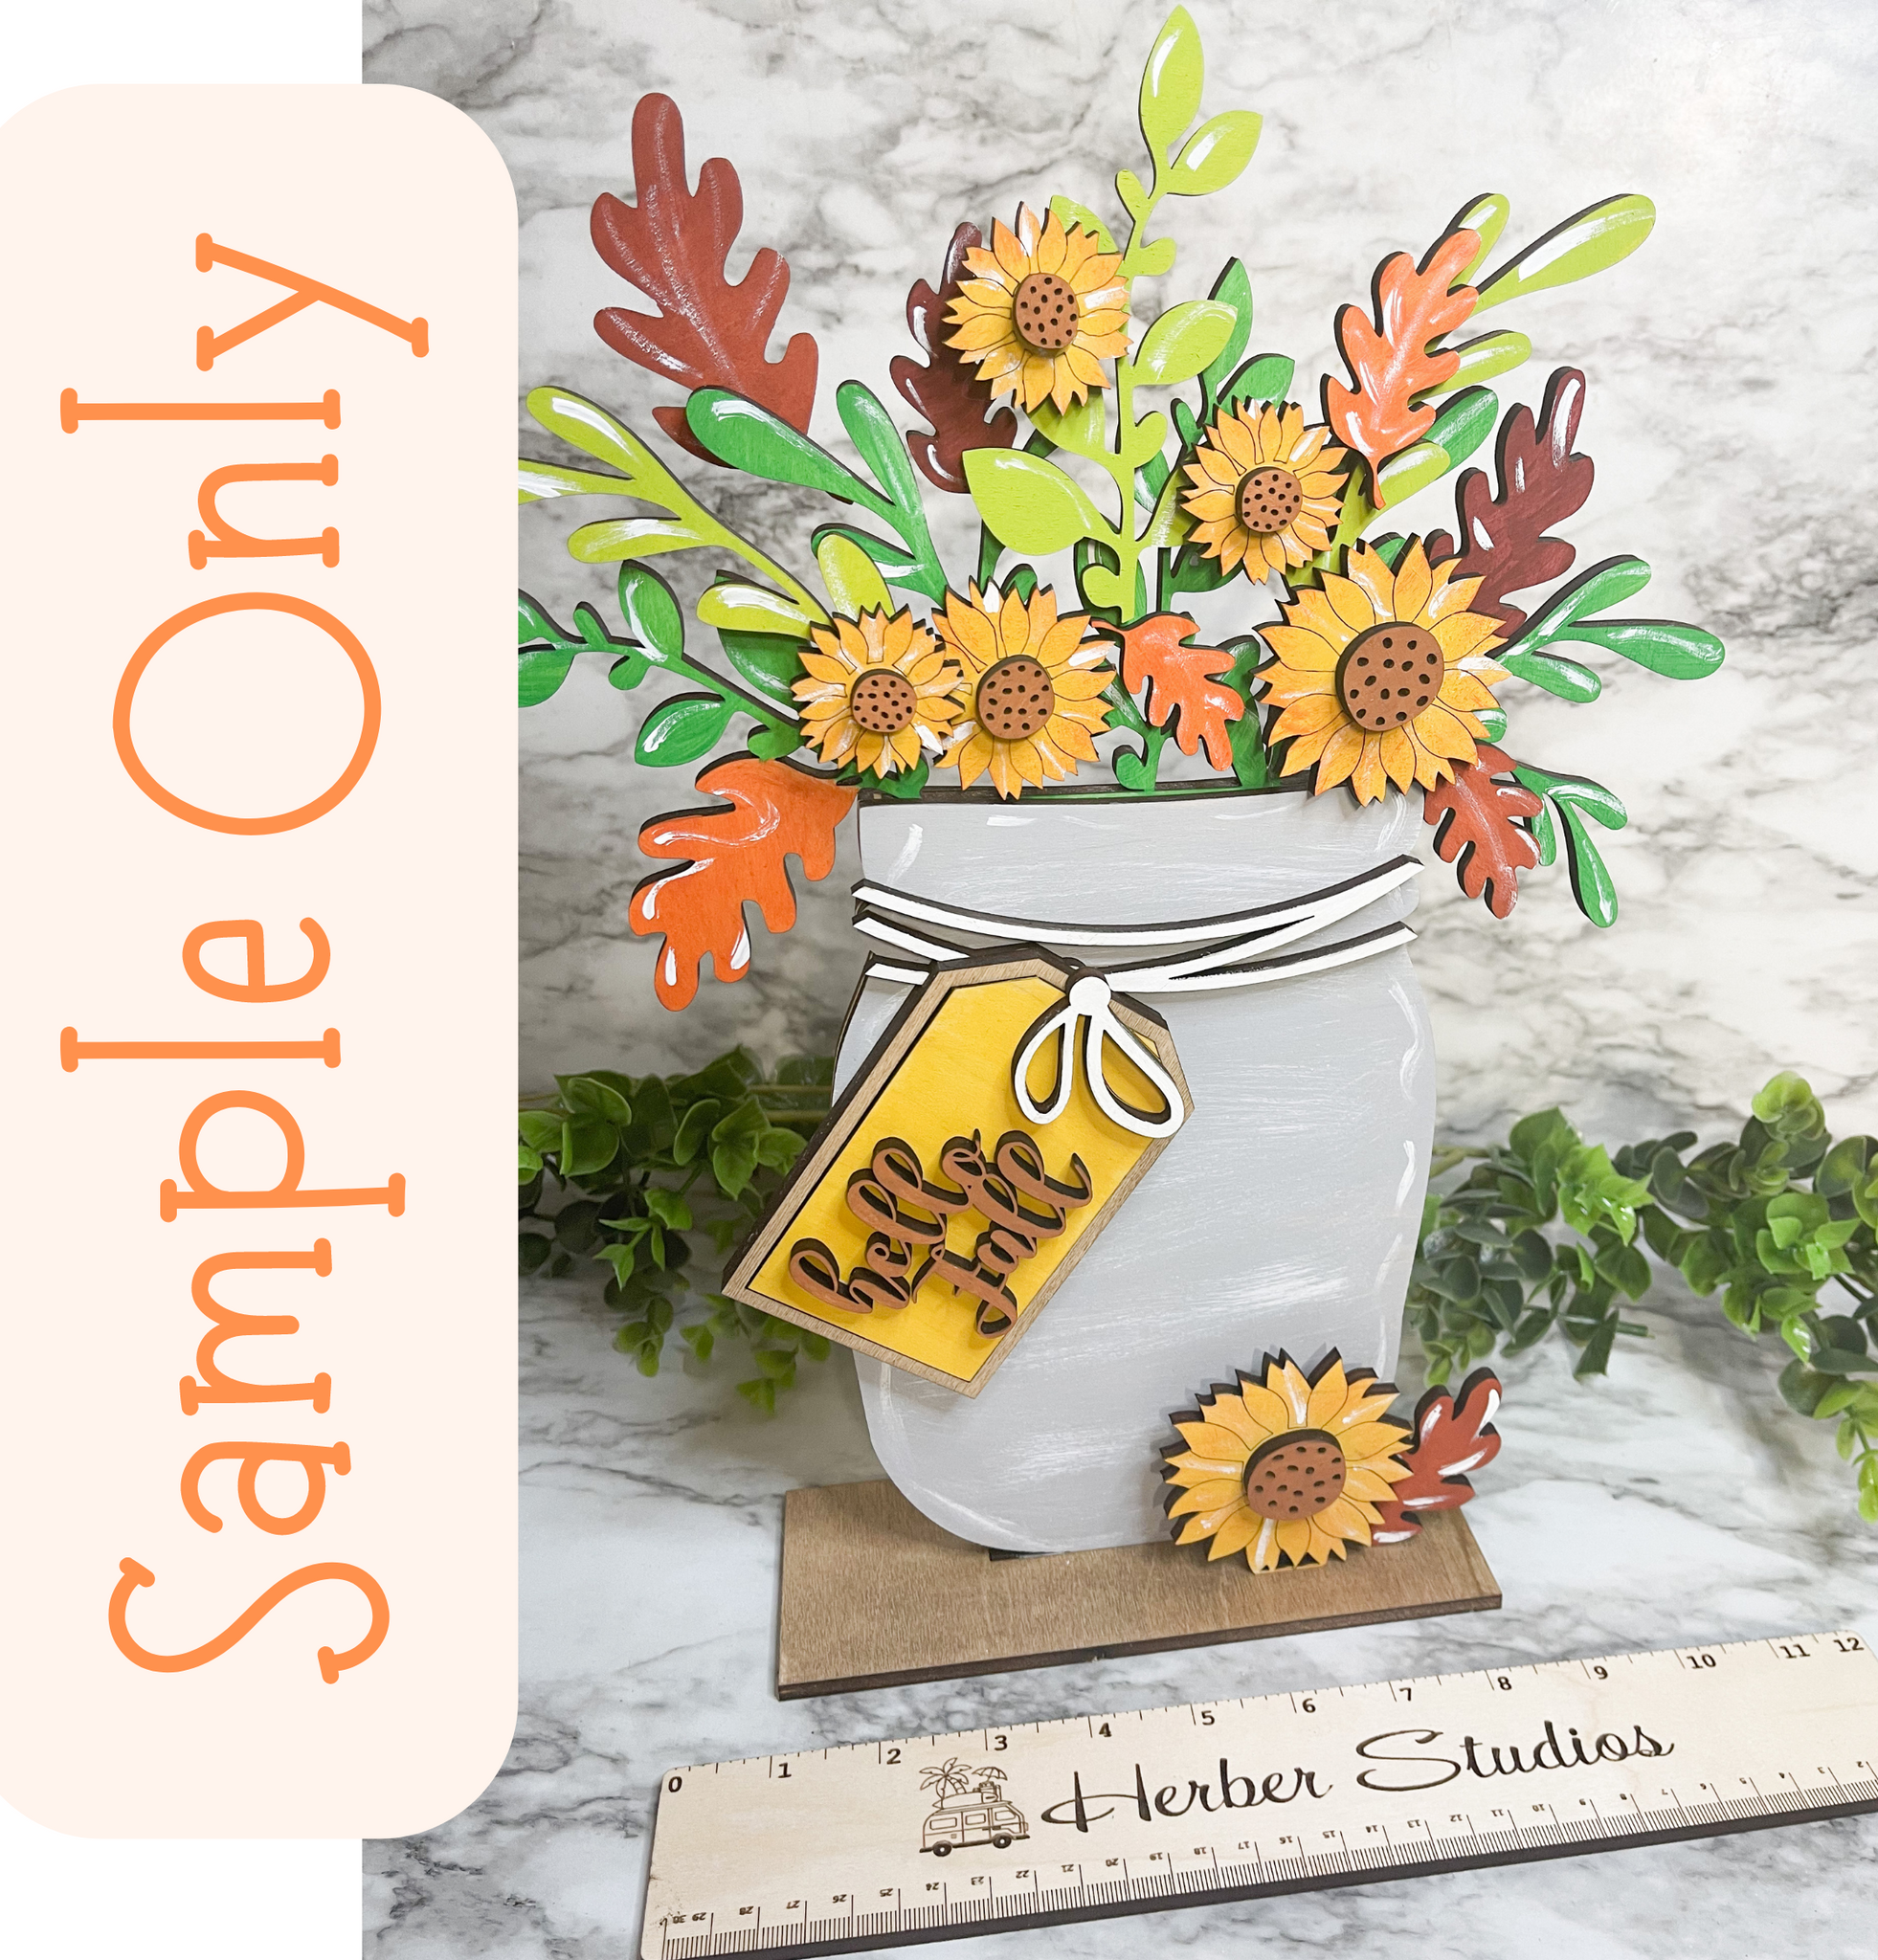 Sunflowers in Vase Do-it-Yourself (DIY) Paint Party Kit